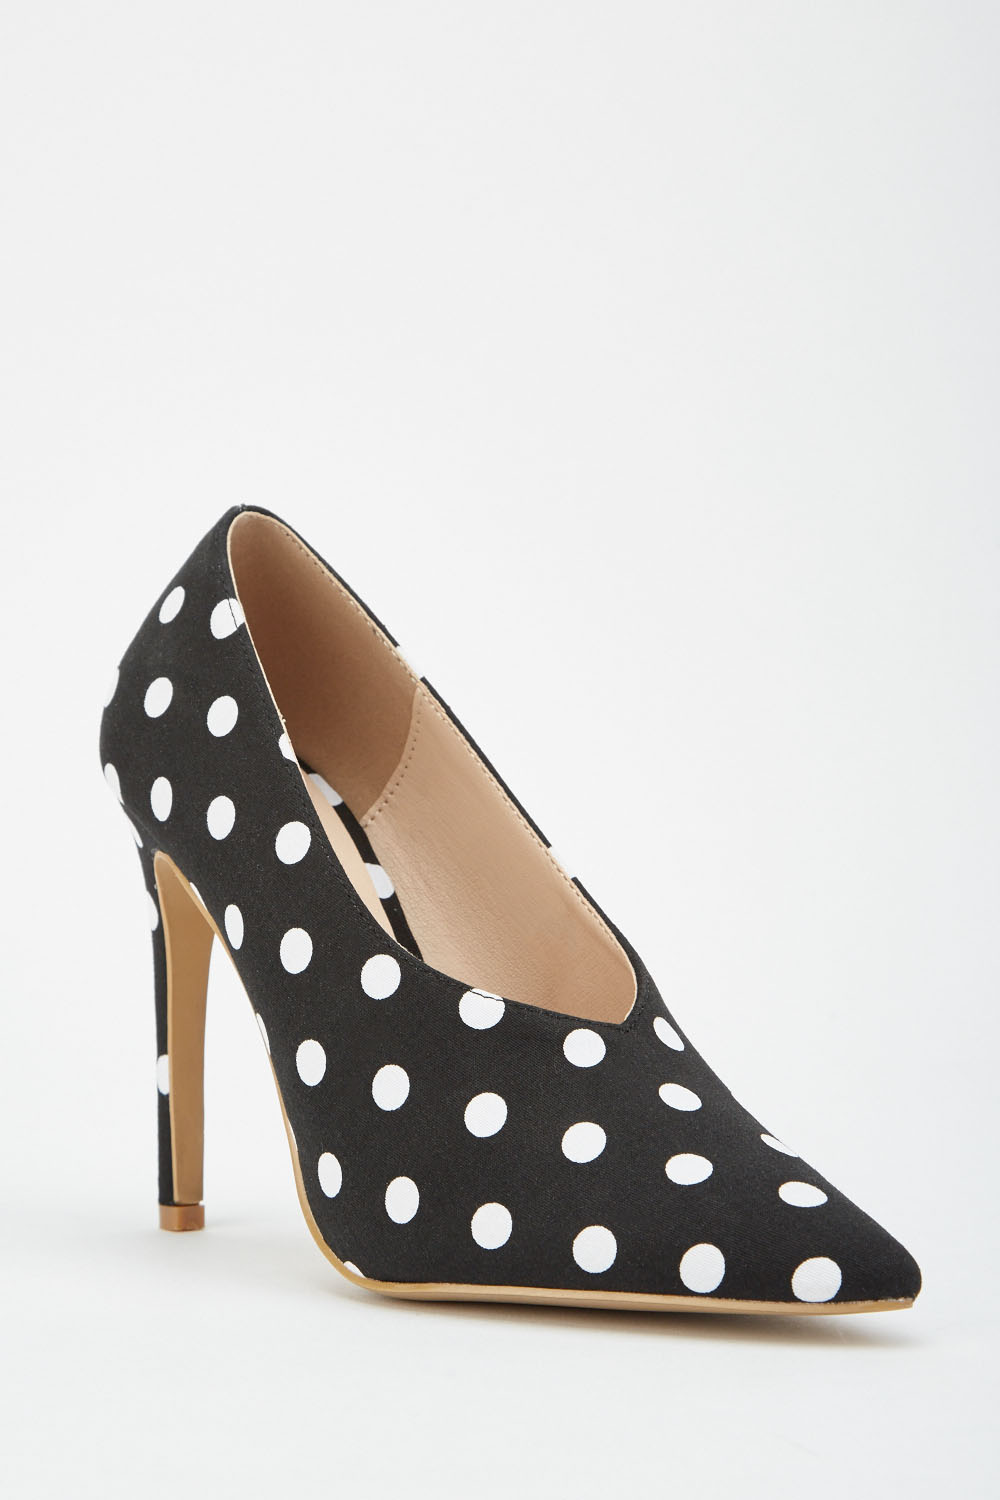 LOST INK Cady High Vamp Court Shoe - Just $7